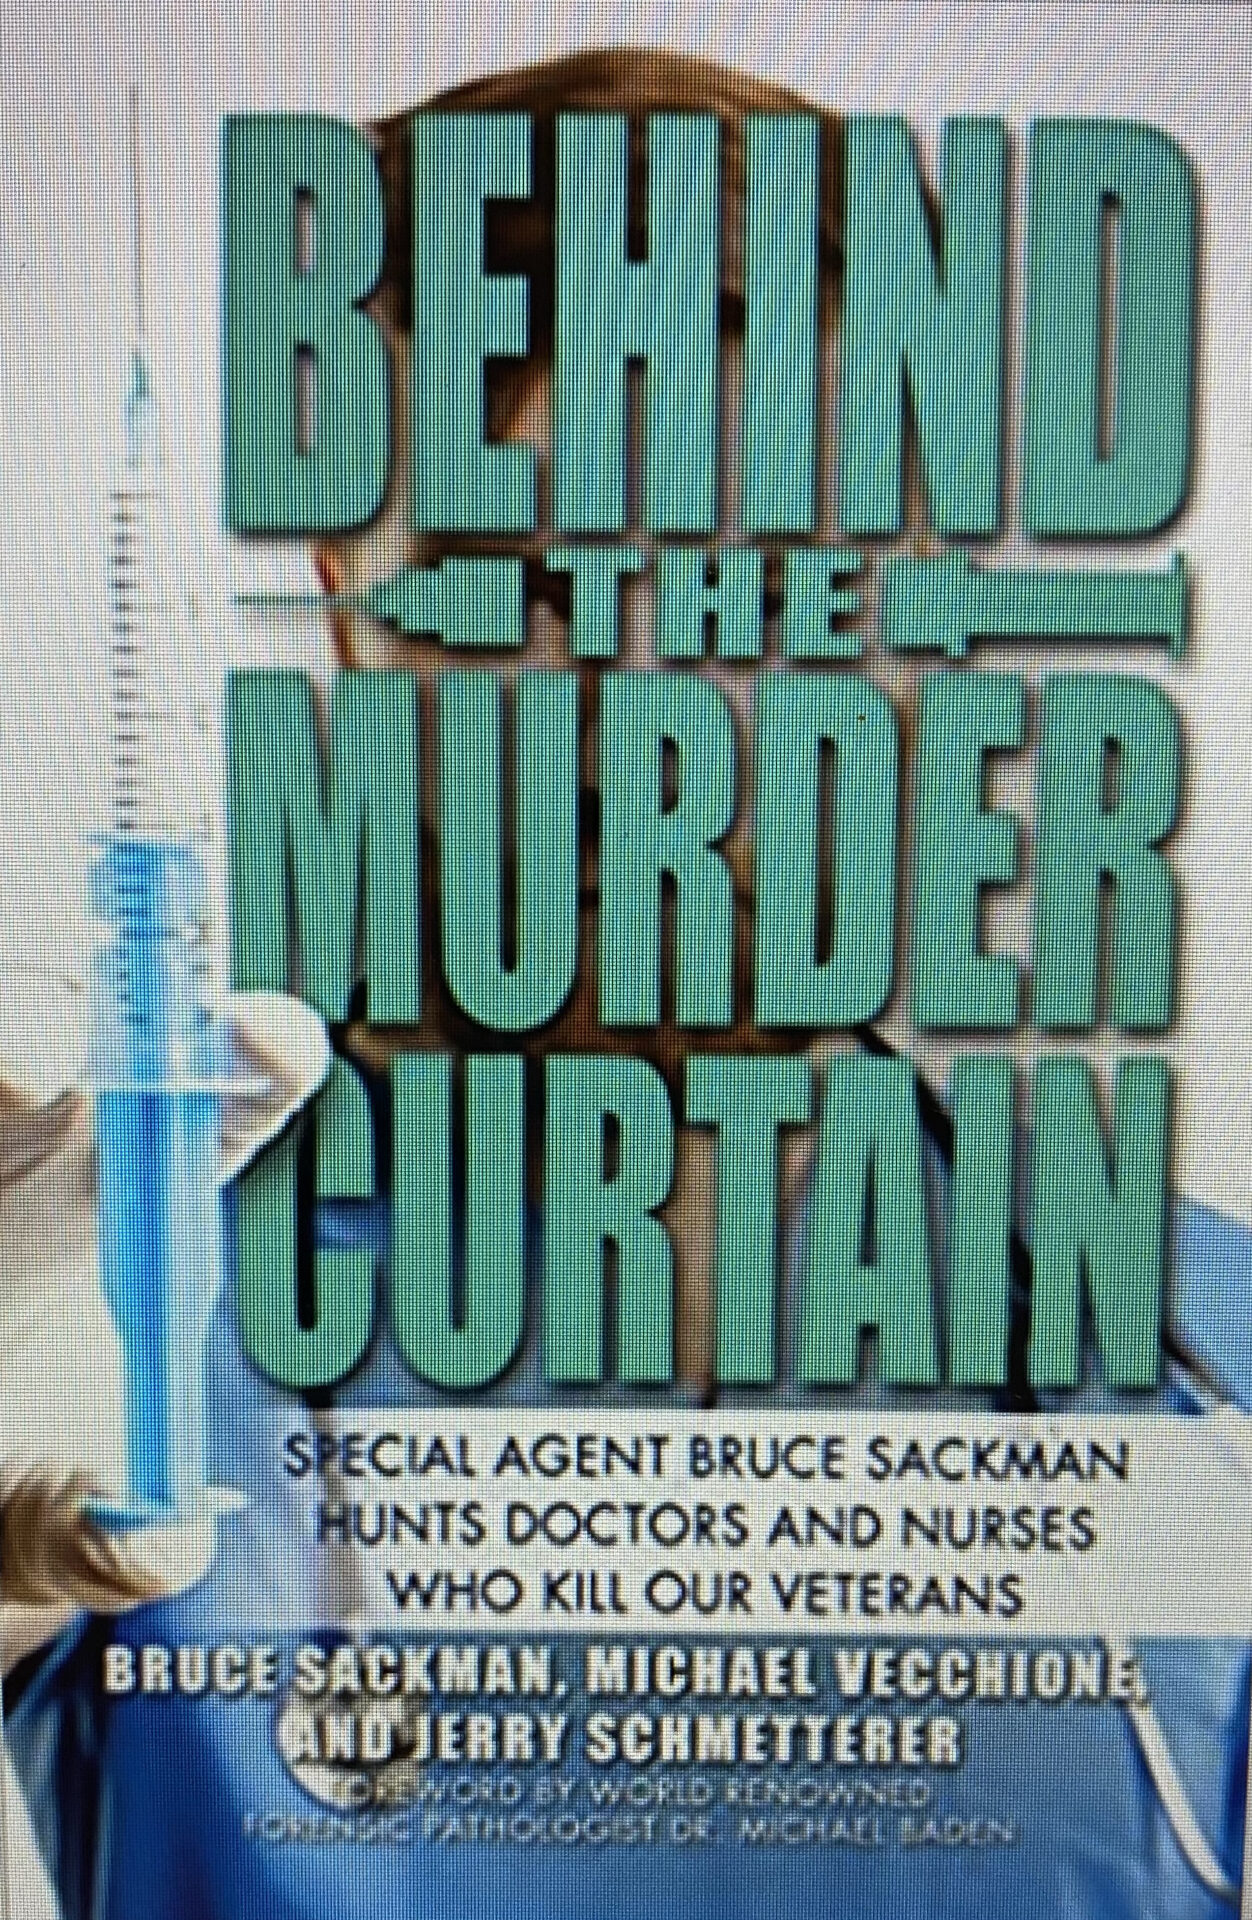 Dr. Michael Baden wrote the foreword to this riveting true crime tale.